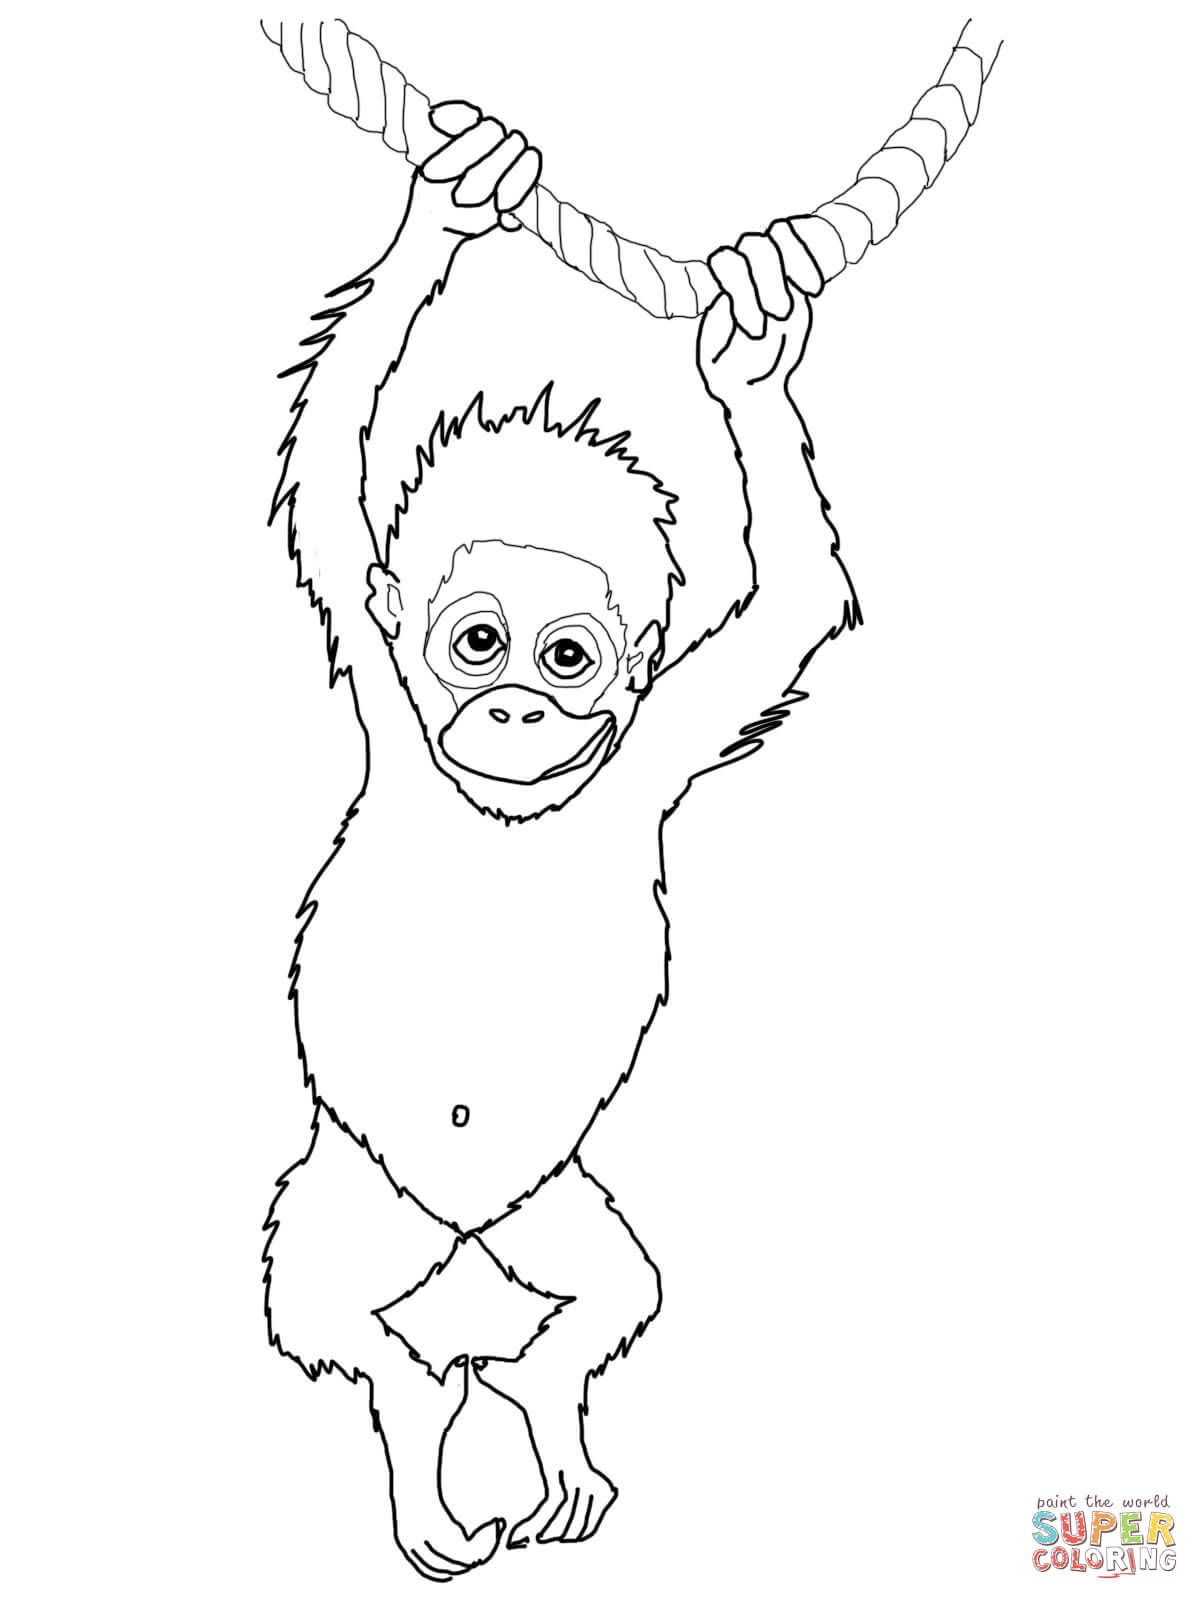 Baby orangutan coloring page from orangutans category select from printable craftsâ animal coloring pages zebra coloring pages farm animal coloring pages